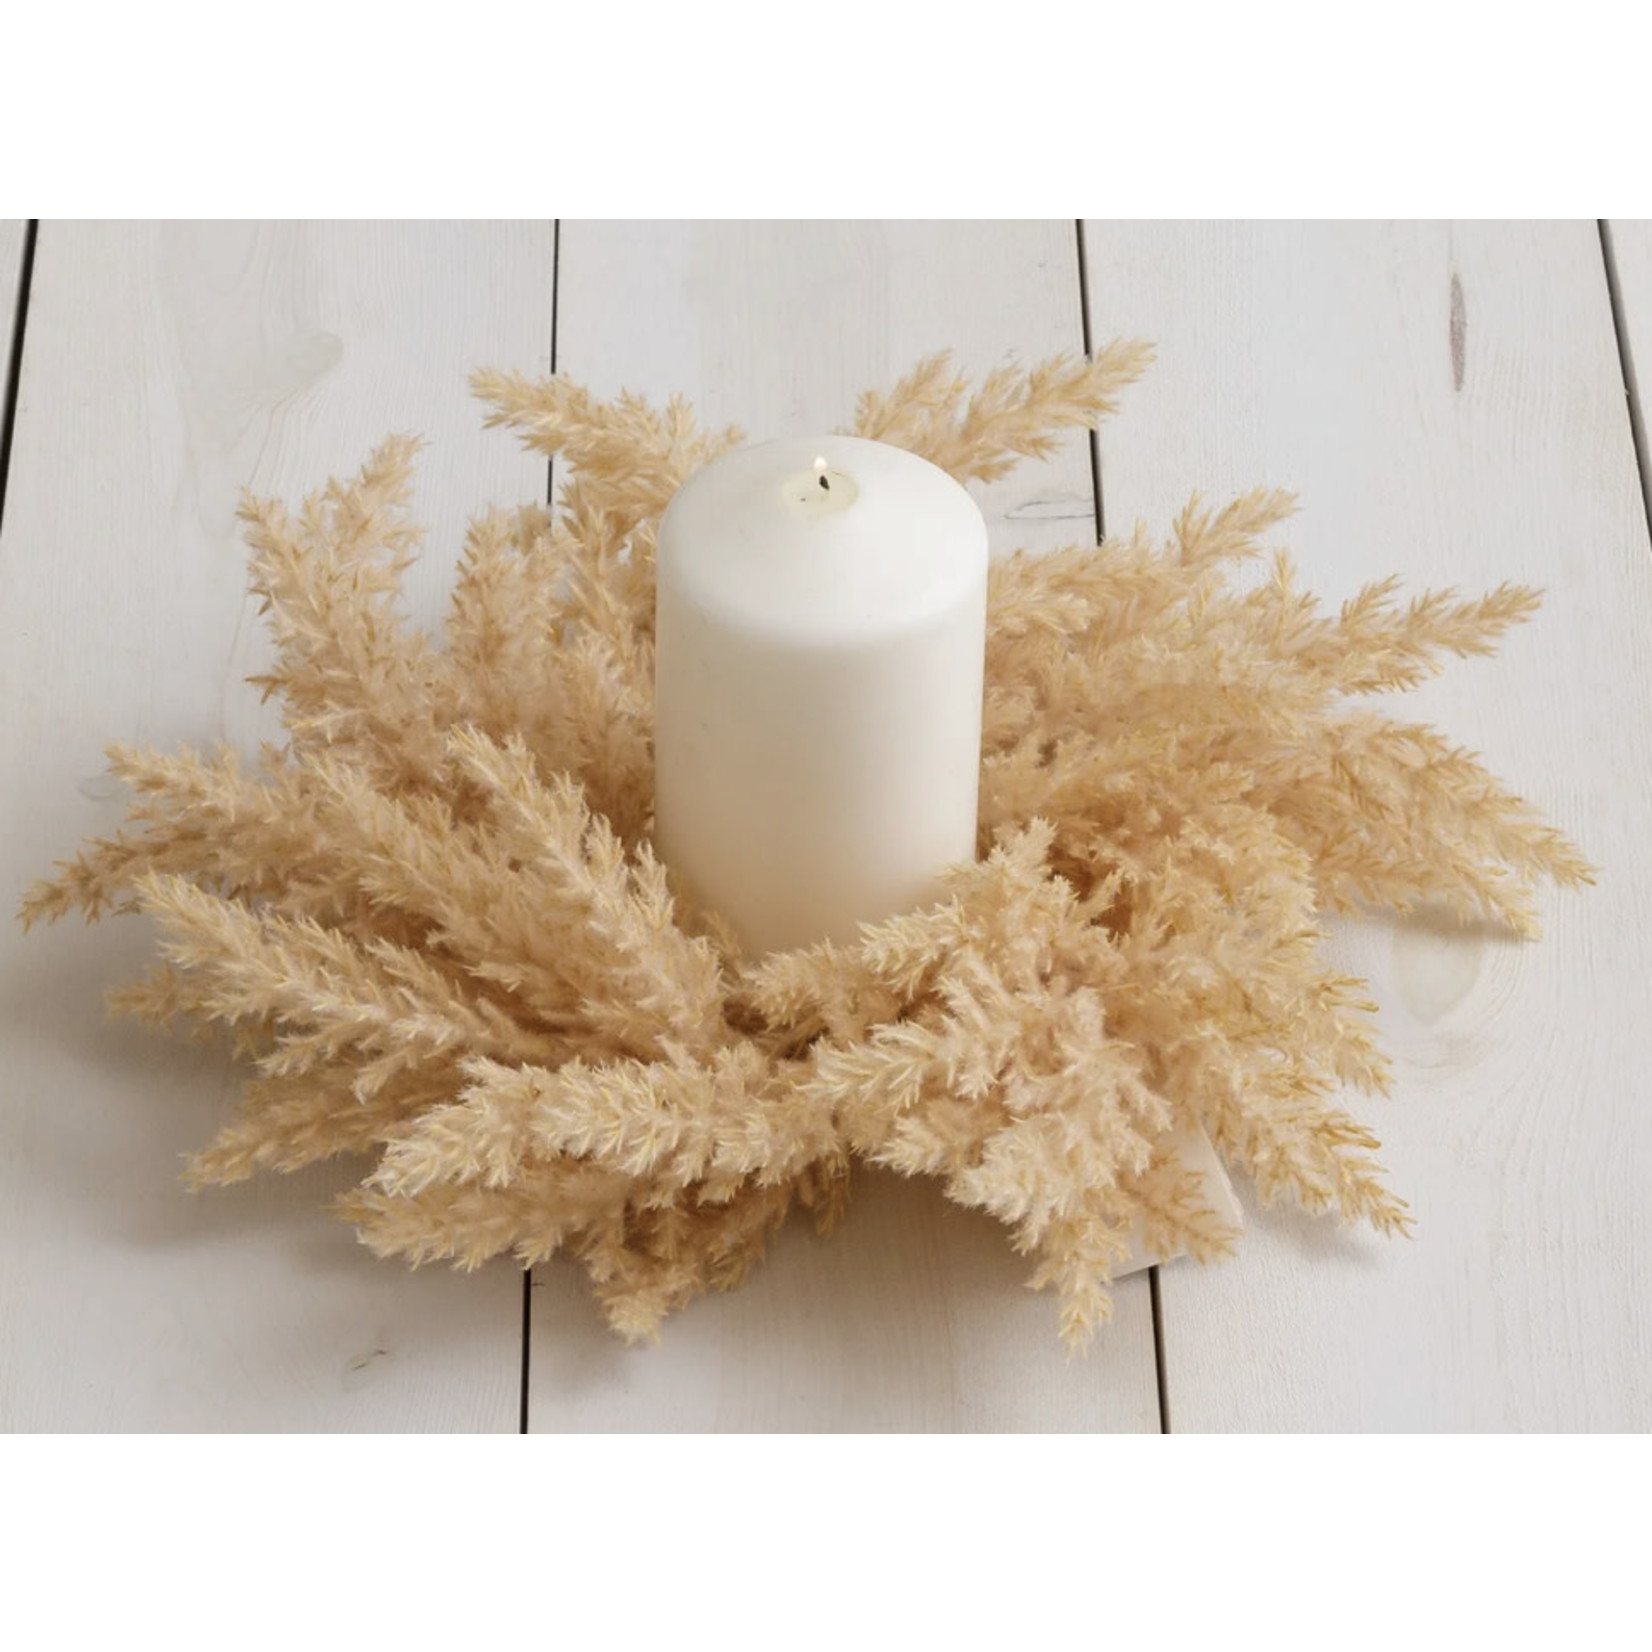 Audrey’s Beige Pampas Candle Ring